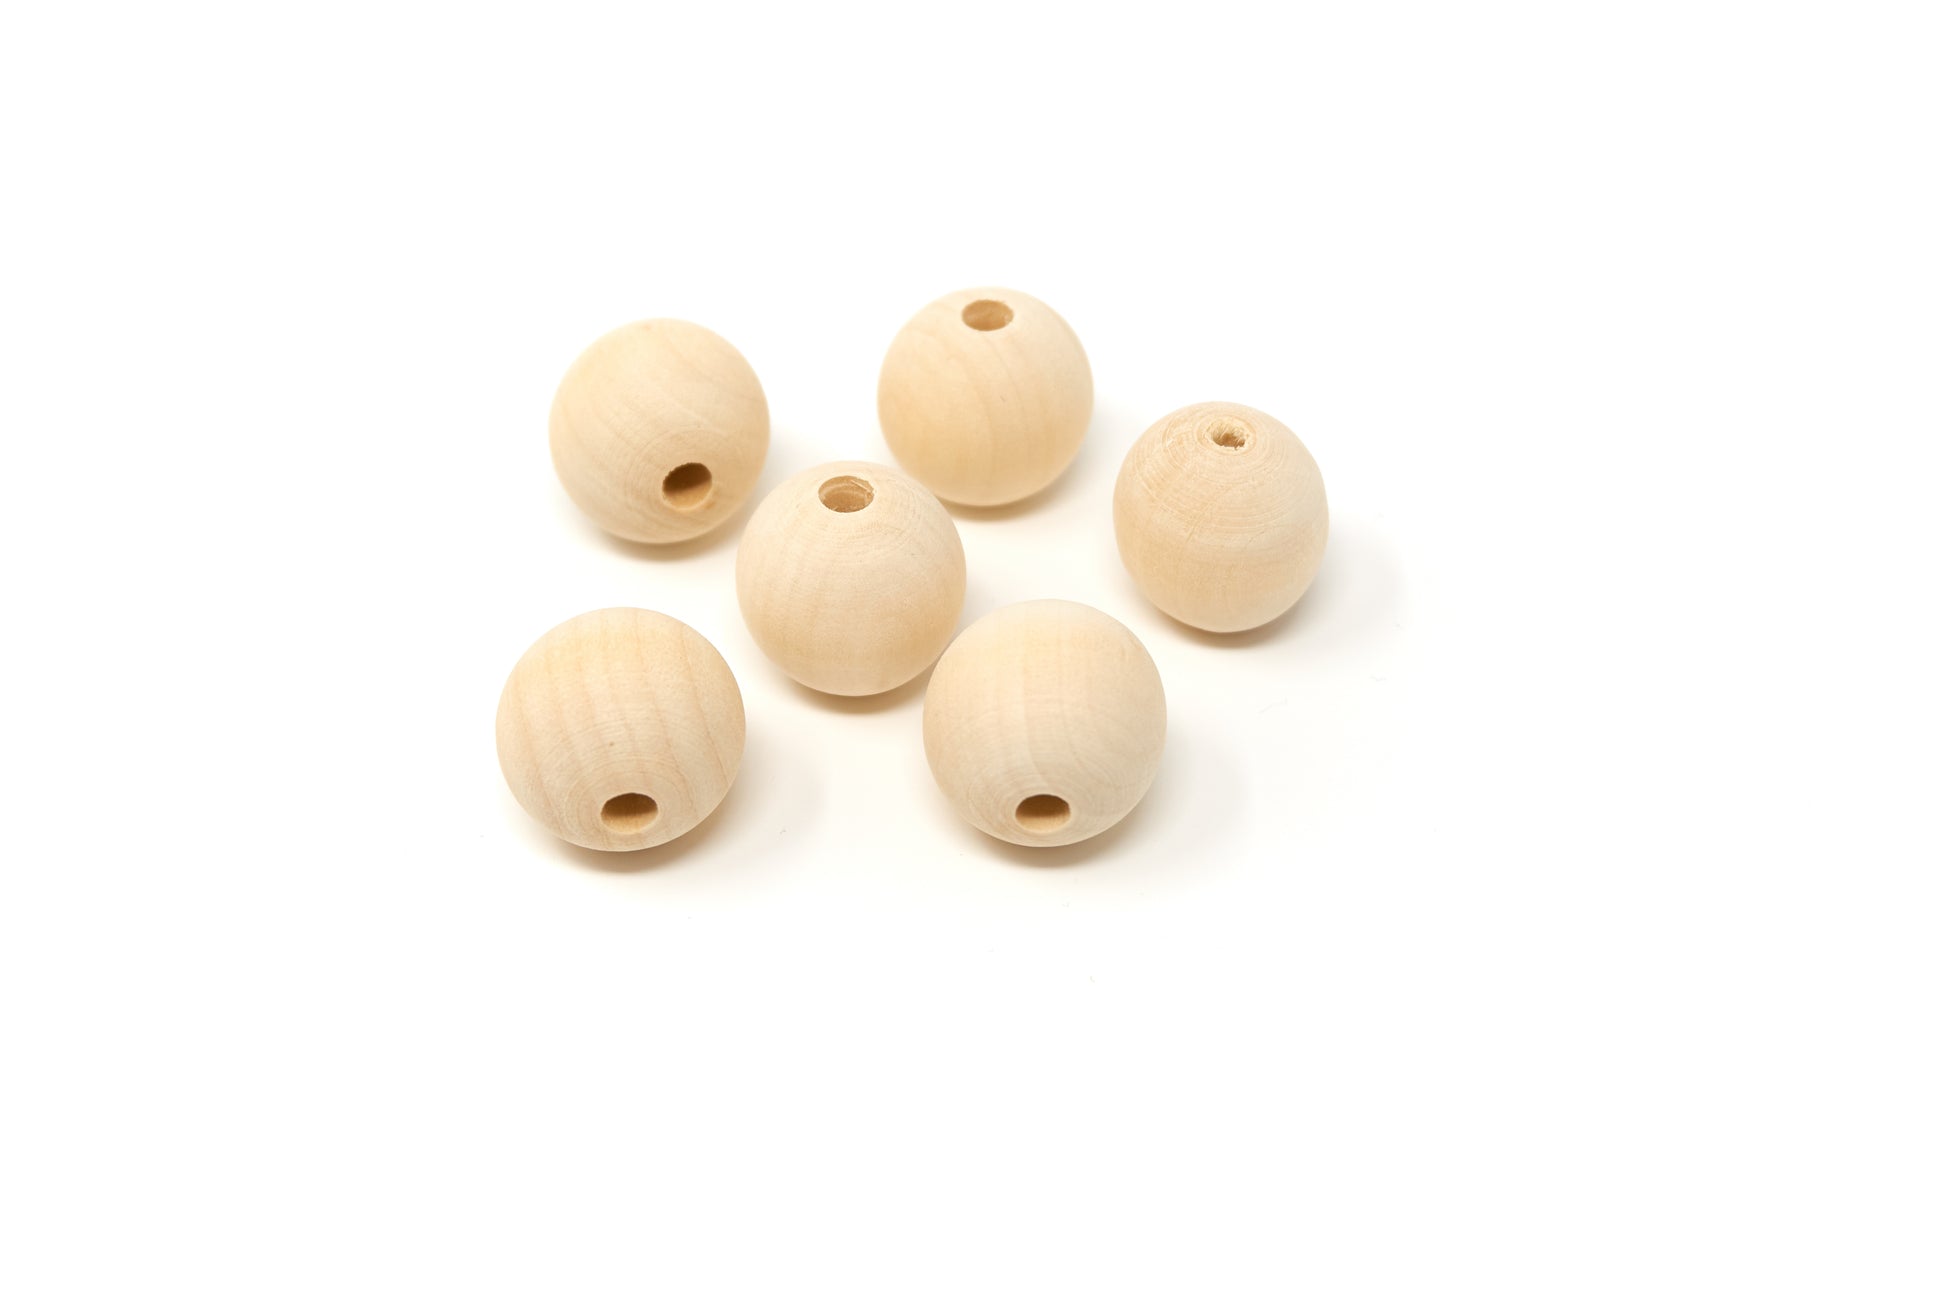 Natural Round Wood Beads 18mm 10 pieces - Cameos Art Shop